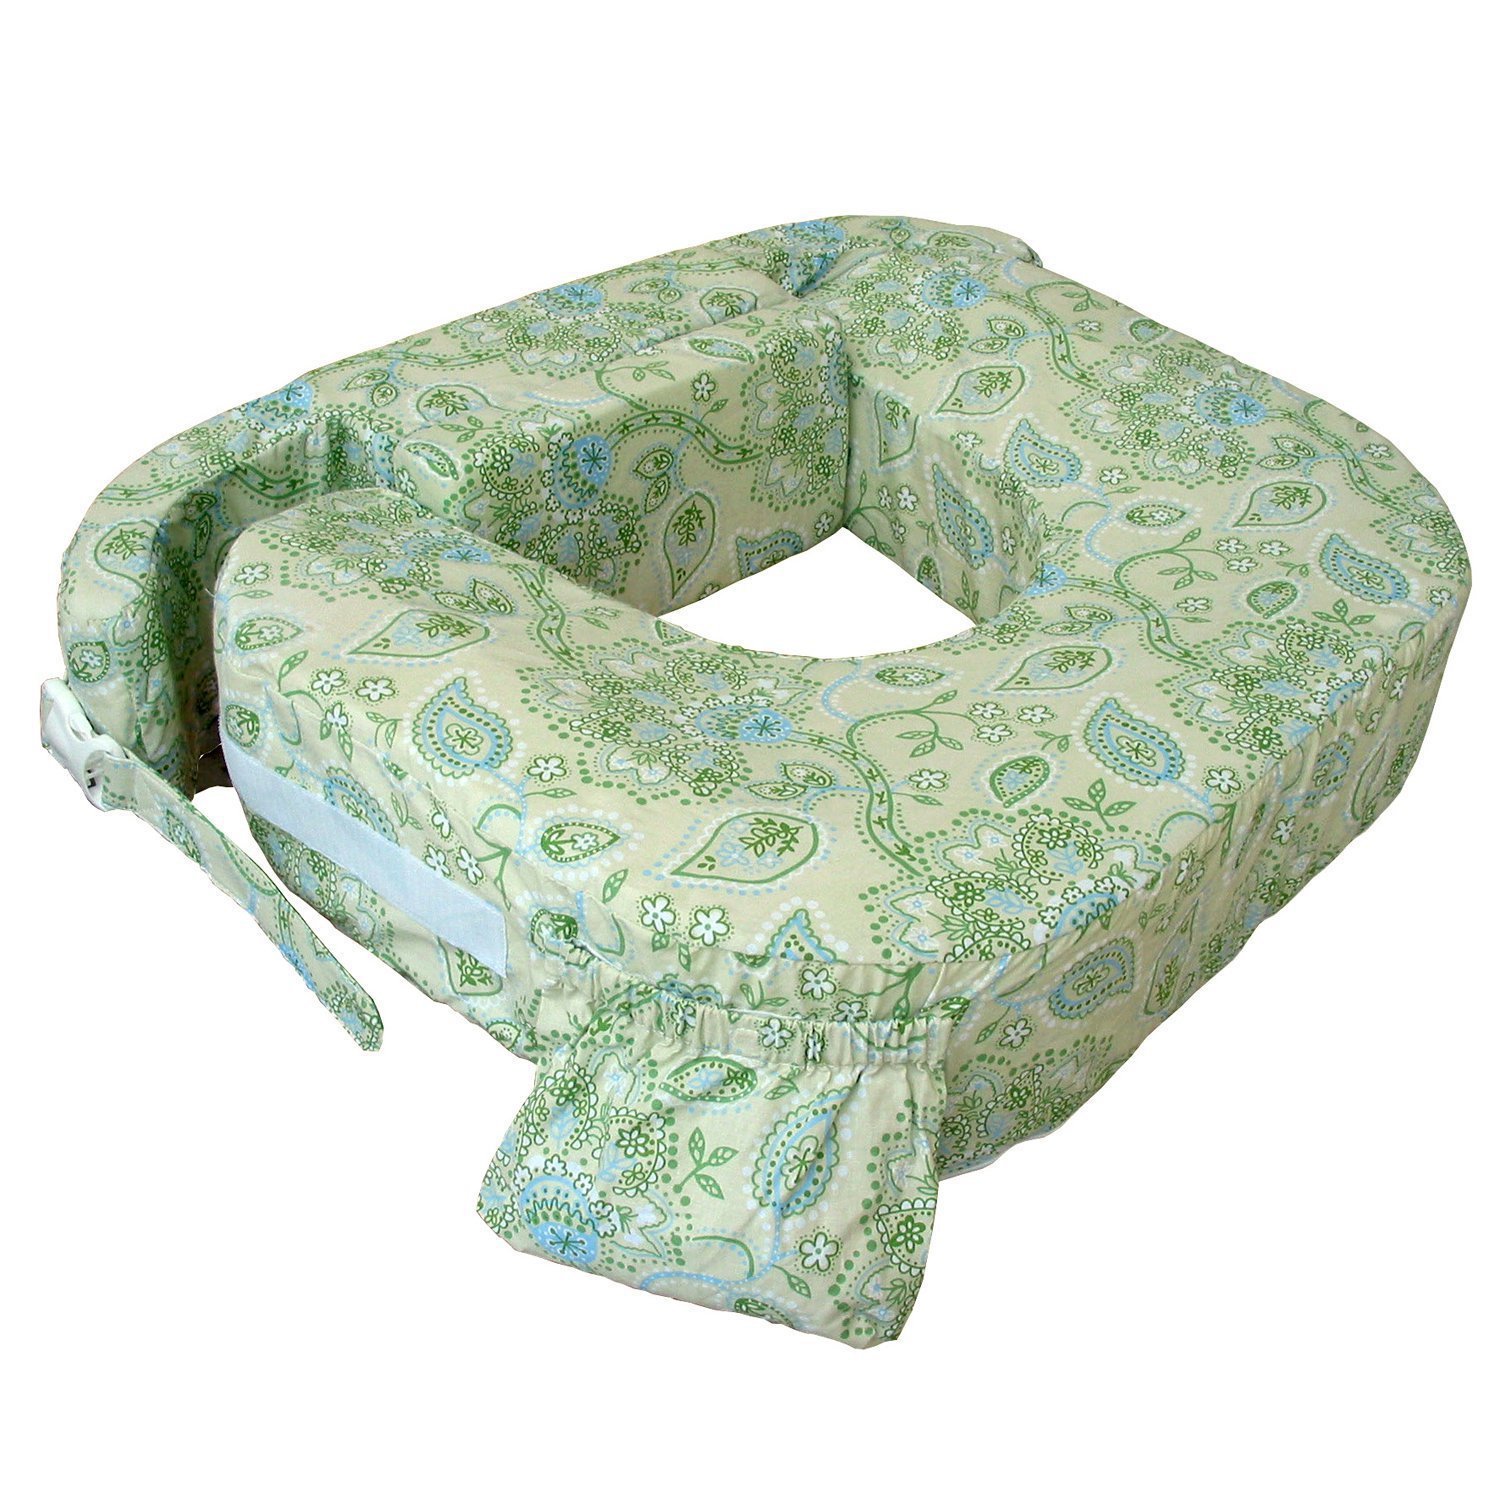 Twin Pillow in Green Paisley